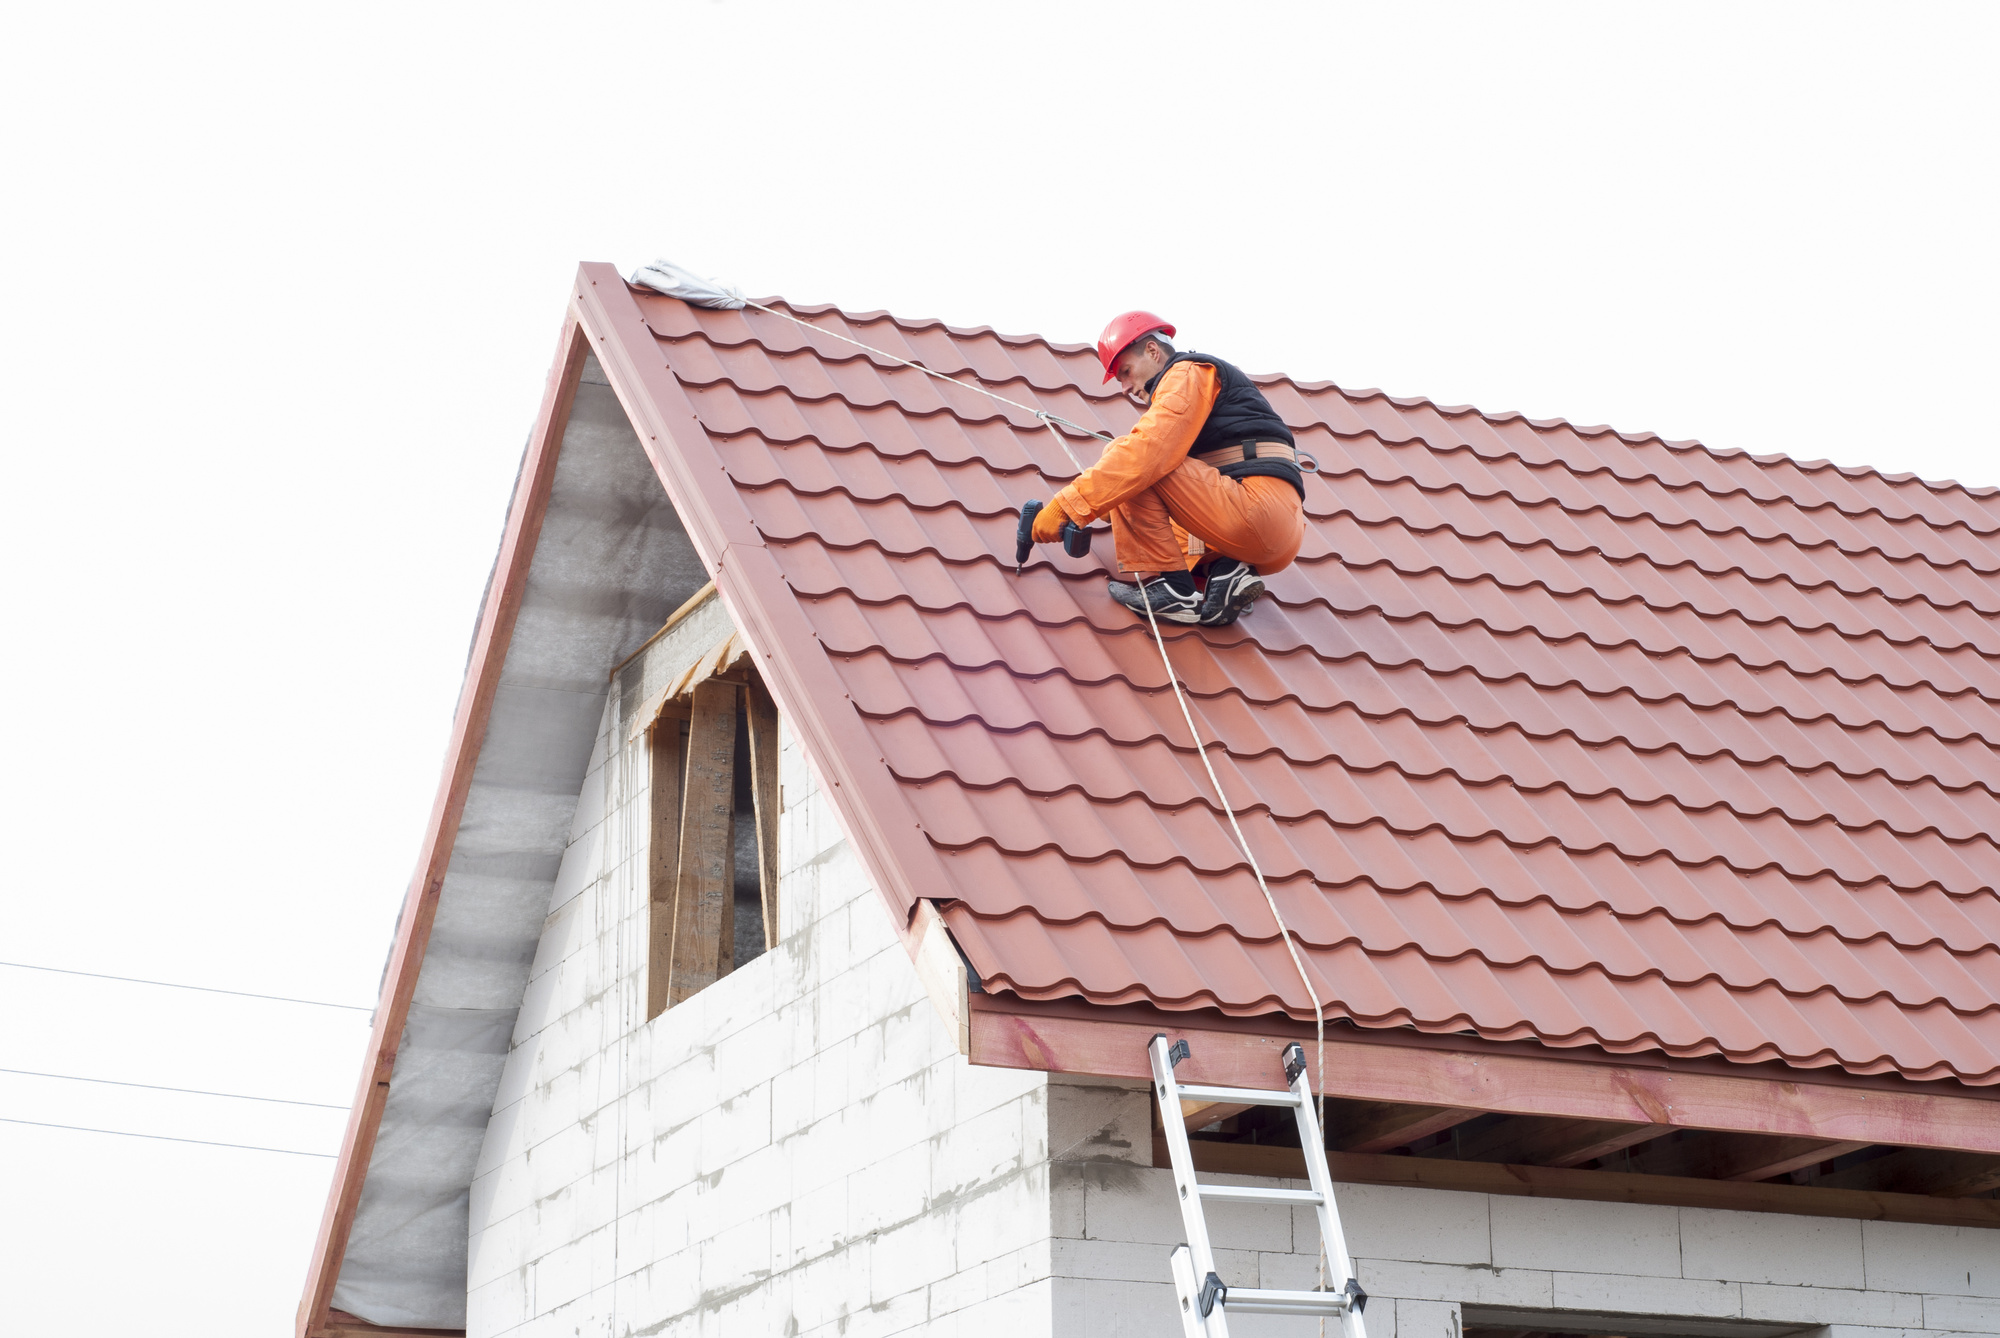 Wondering how long the average roof lifespan is? Well look no further, because we're about to answer all of your questions.